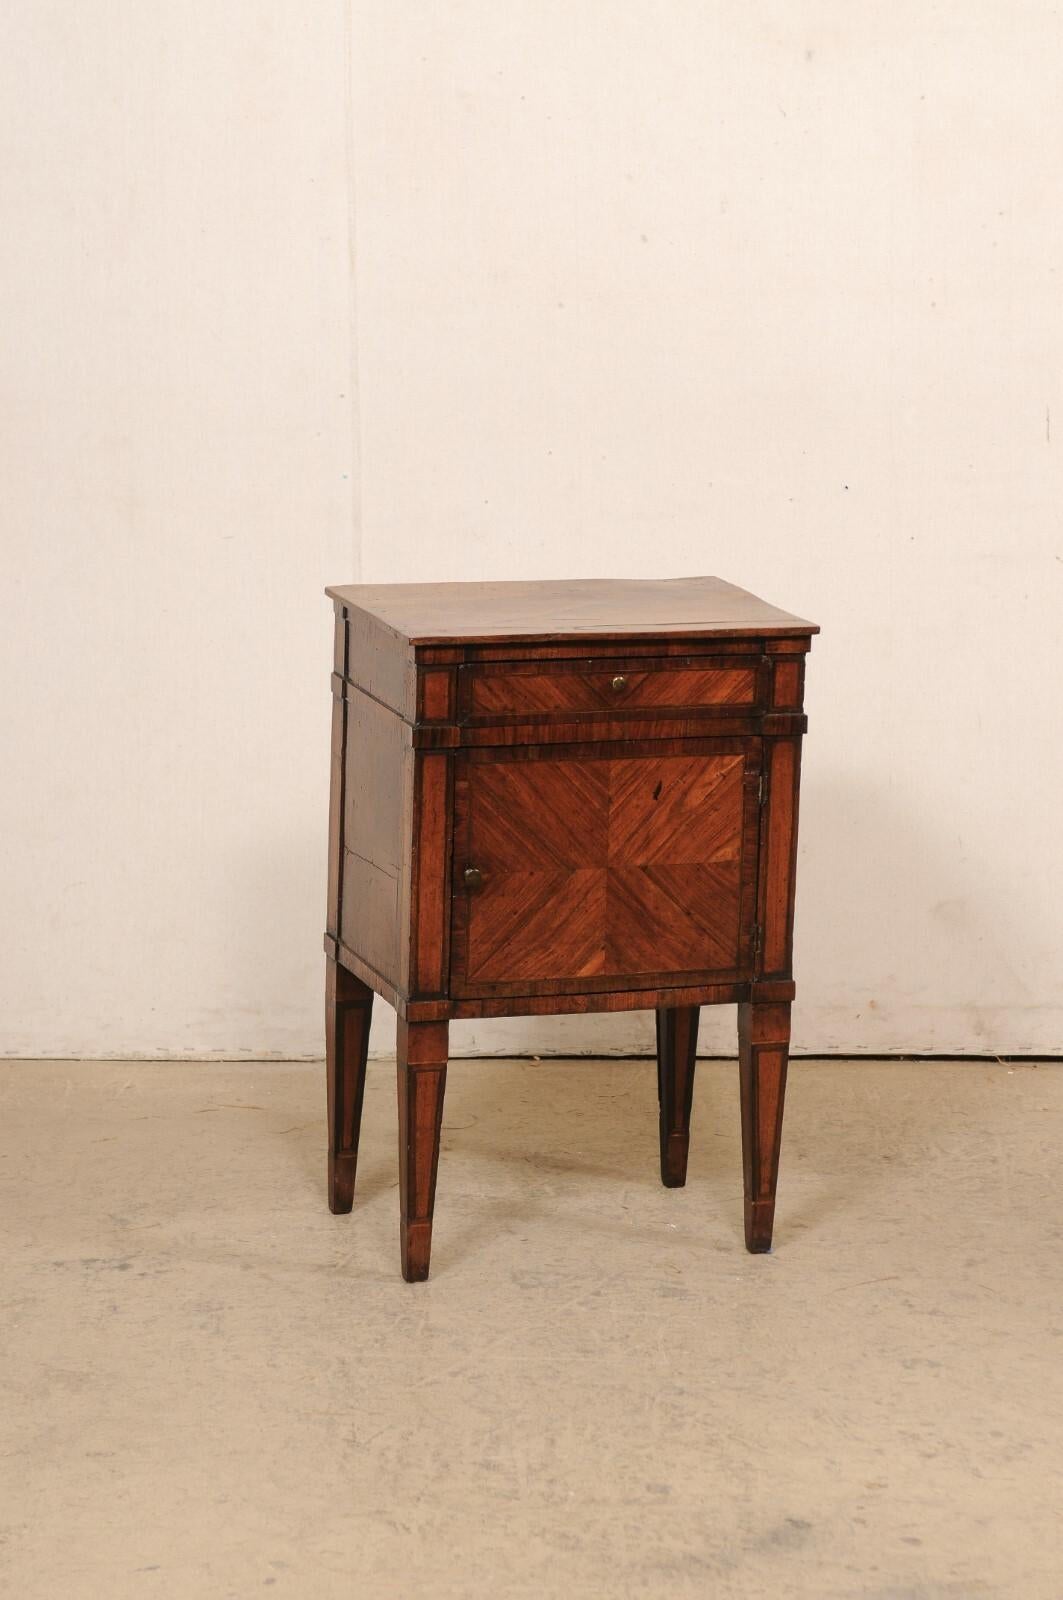 An Italian smaller sized veneered wood raised cabinet from the early 19th century. This antique end table from Italy has a case which houses a slender drawer at top, with a single door below (with open storage within). The chest has a beautifully